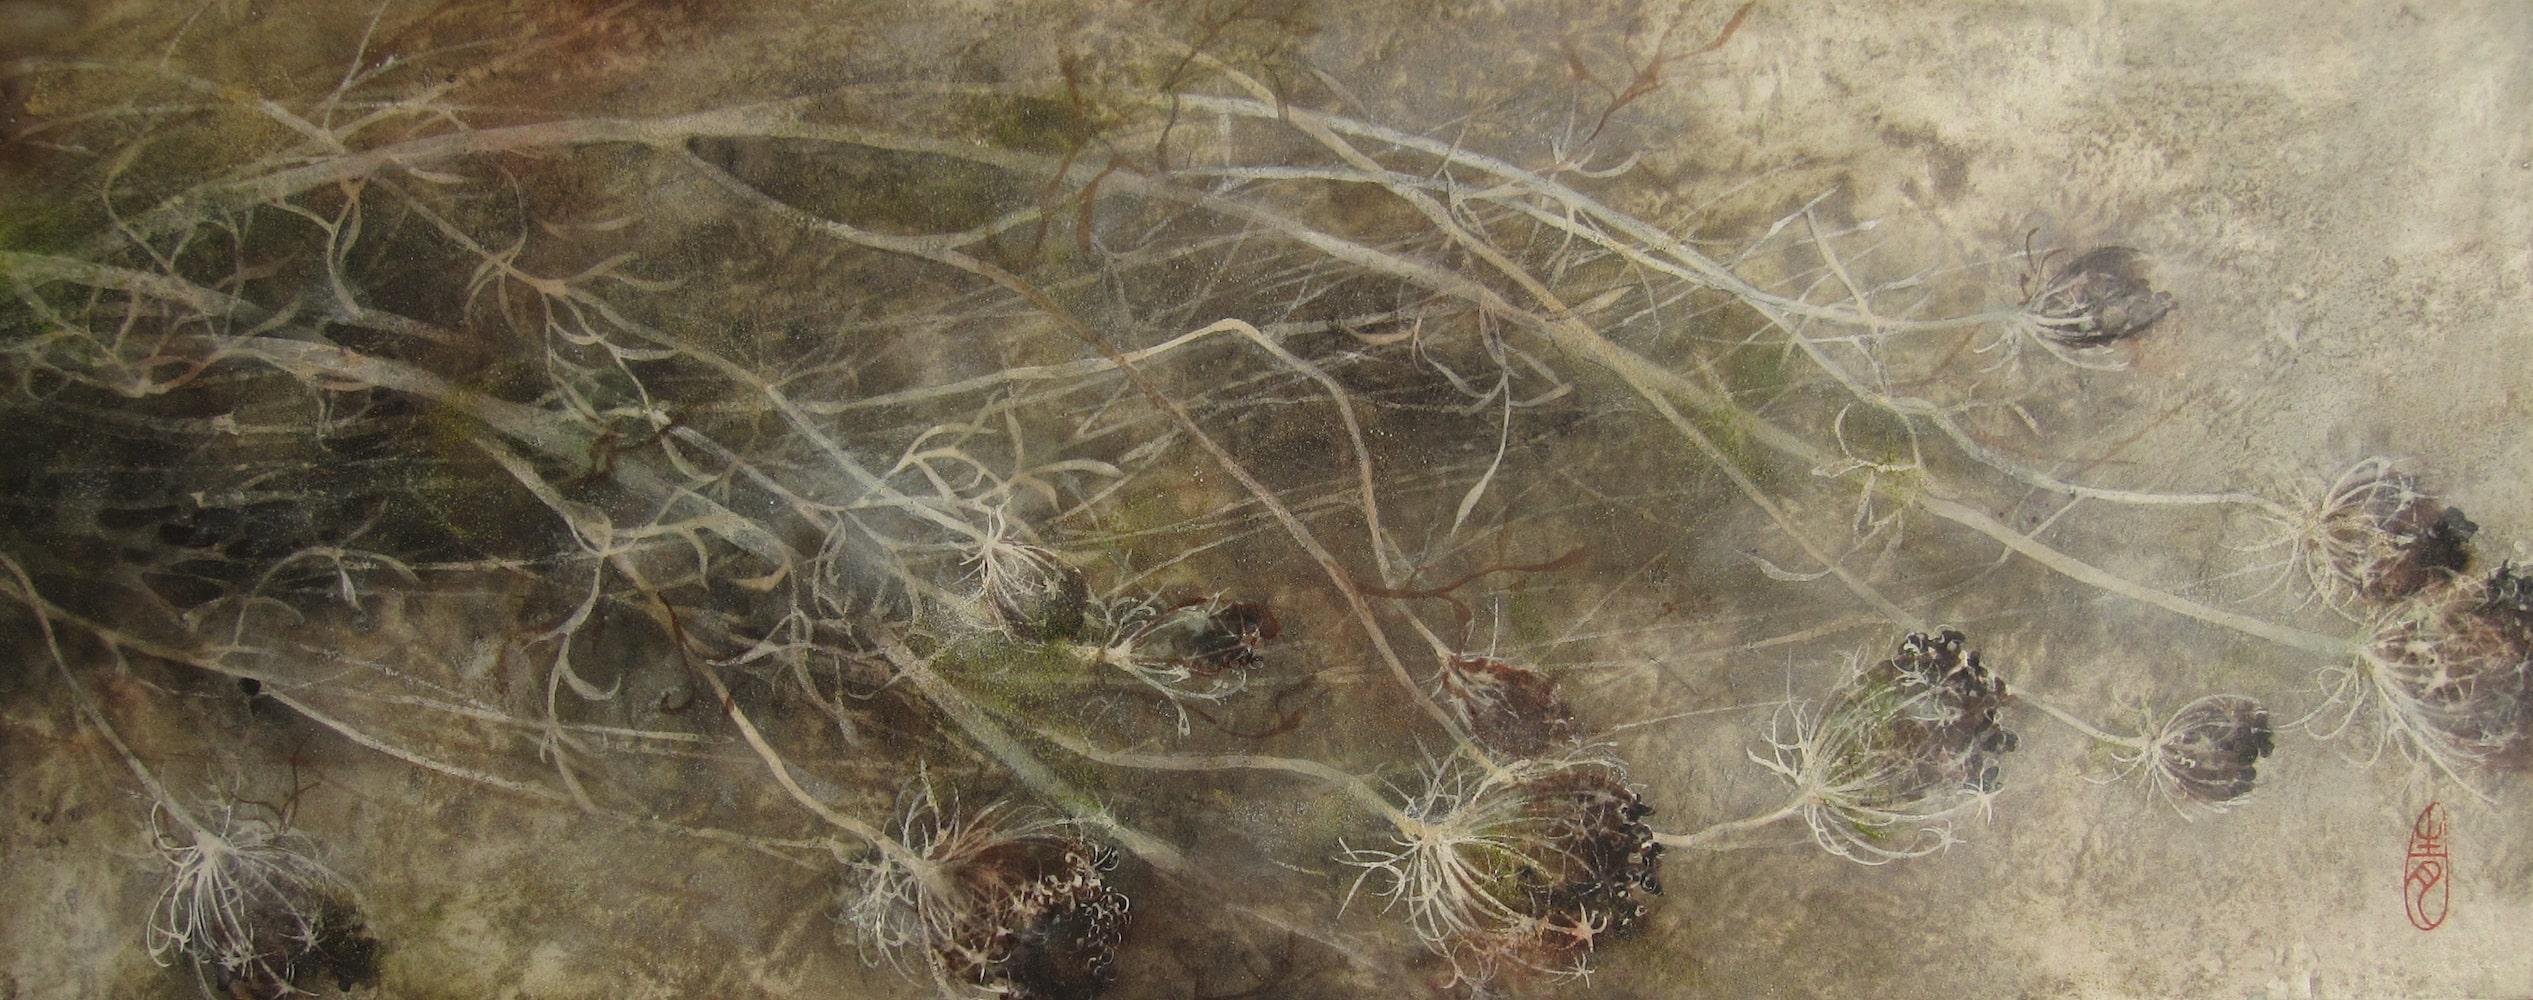 Umbel by Chen Yiching - Contemporary nihonga painting, flora, earth tones